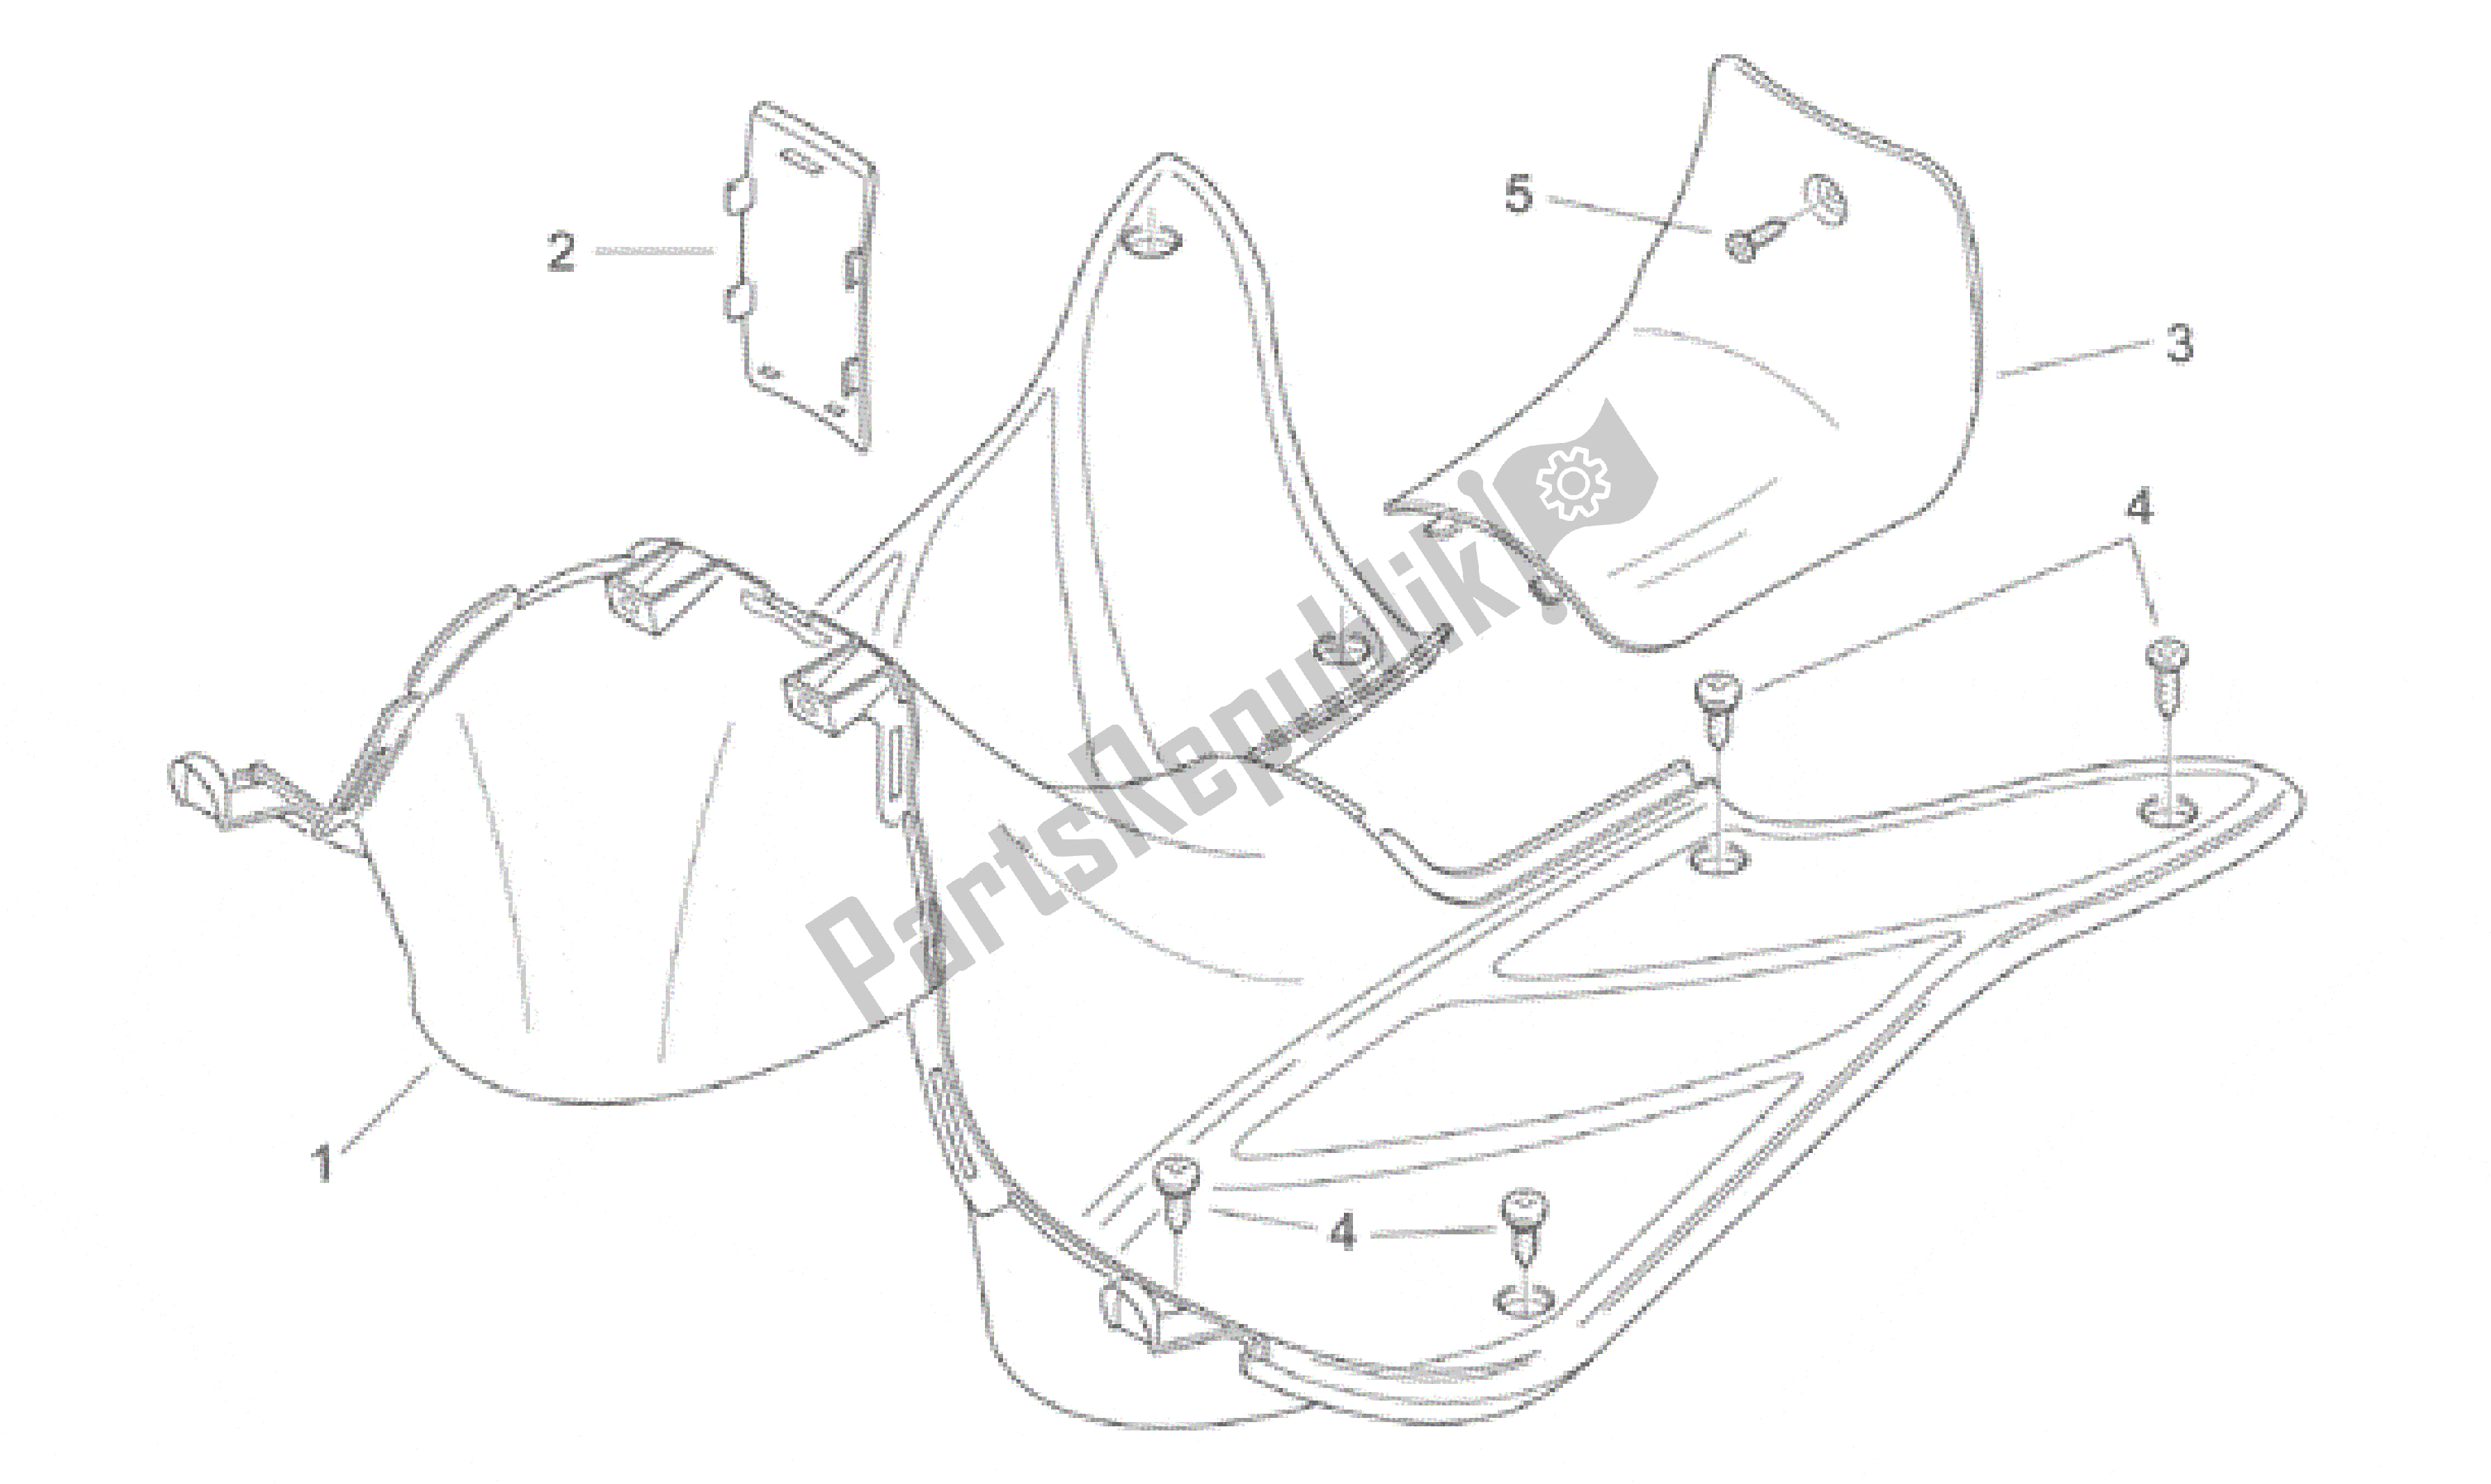 All parts for the Central Body Ii of the Aprilia Habana 50 1999 - 2001